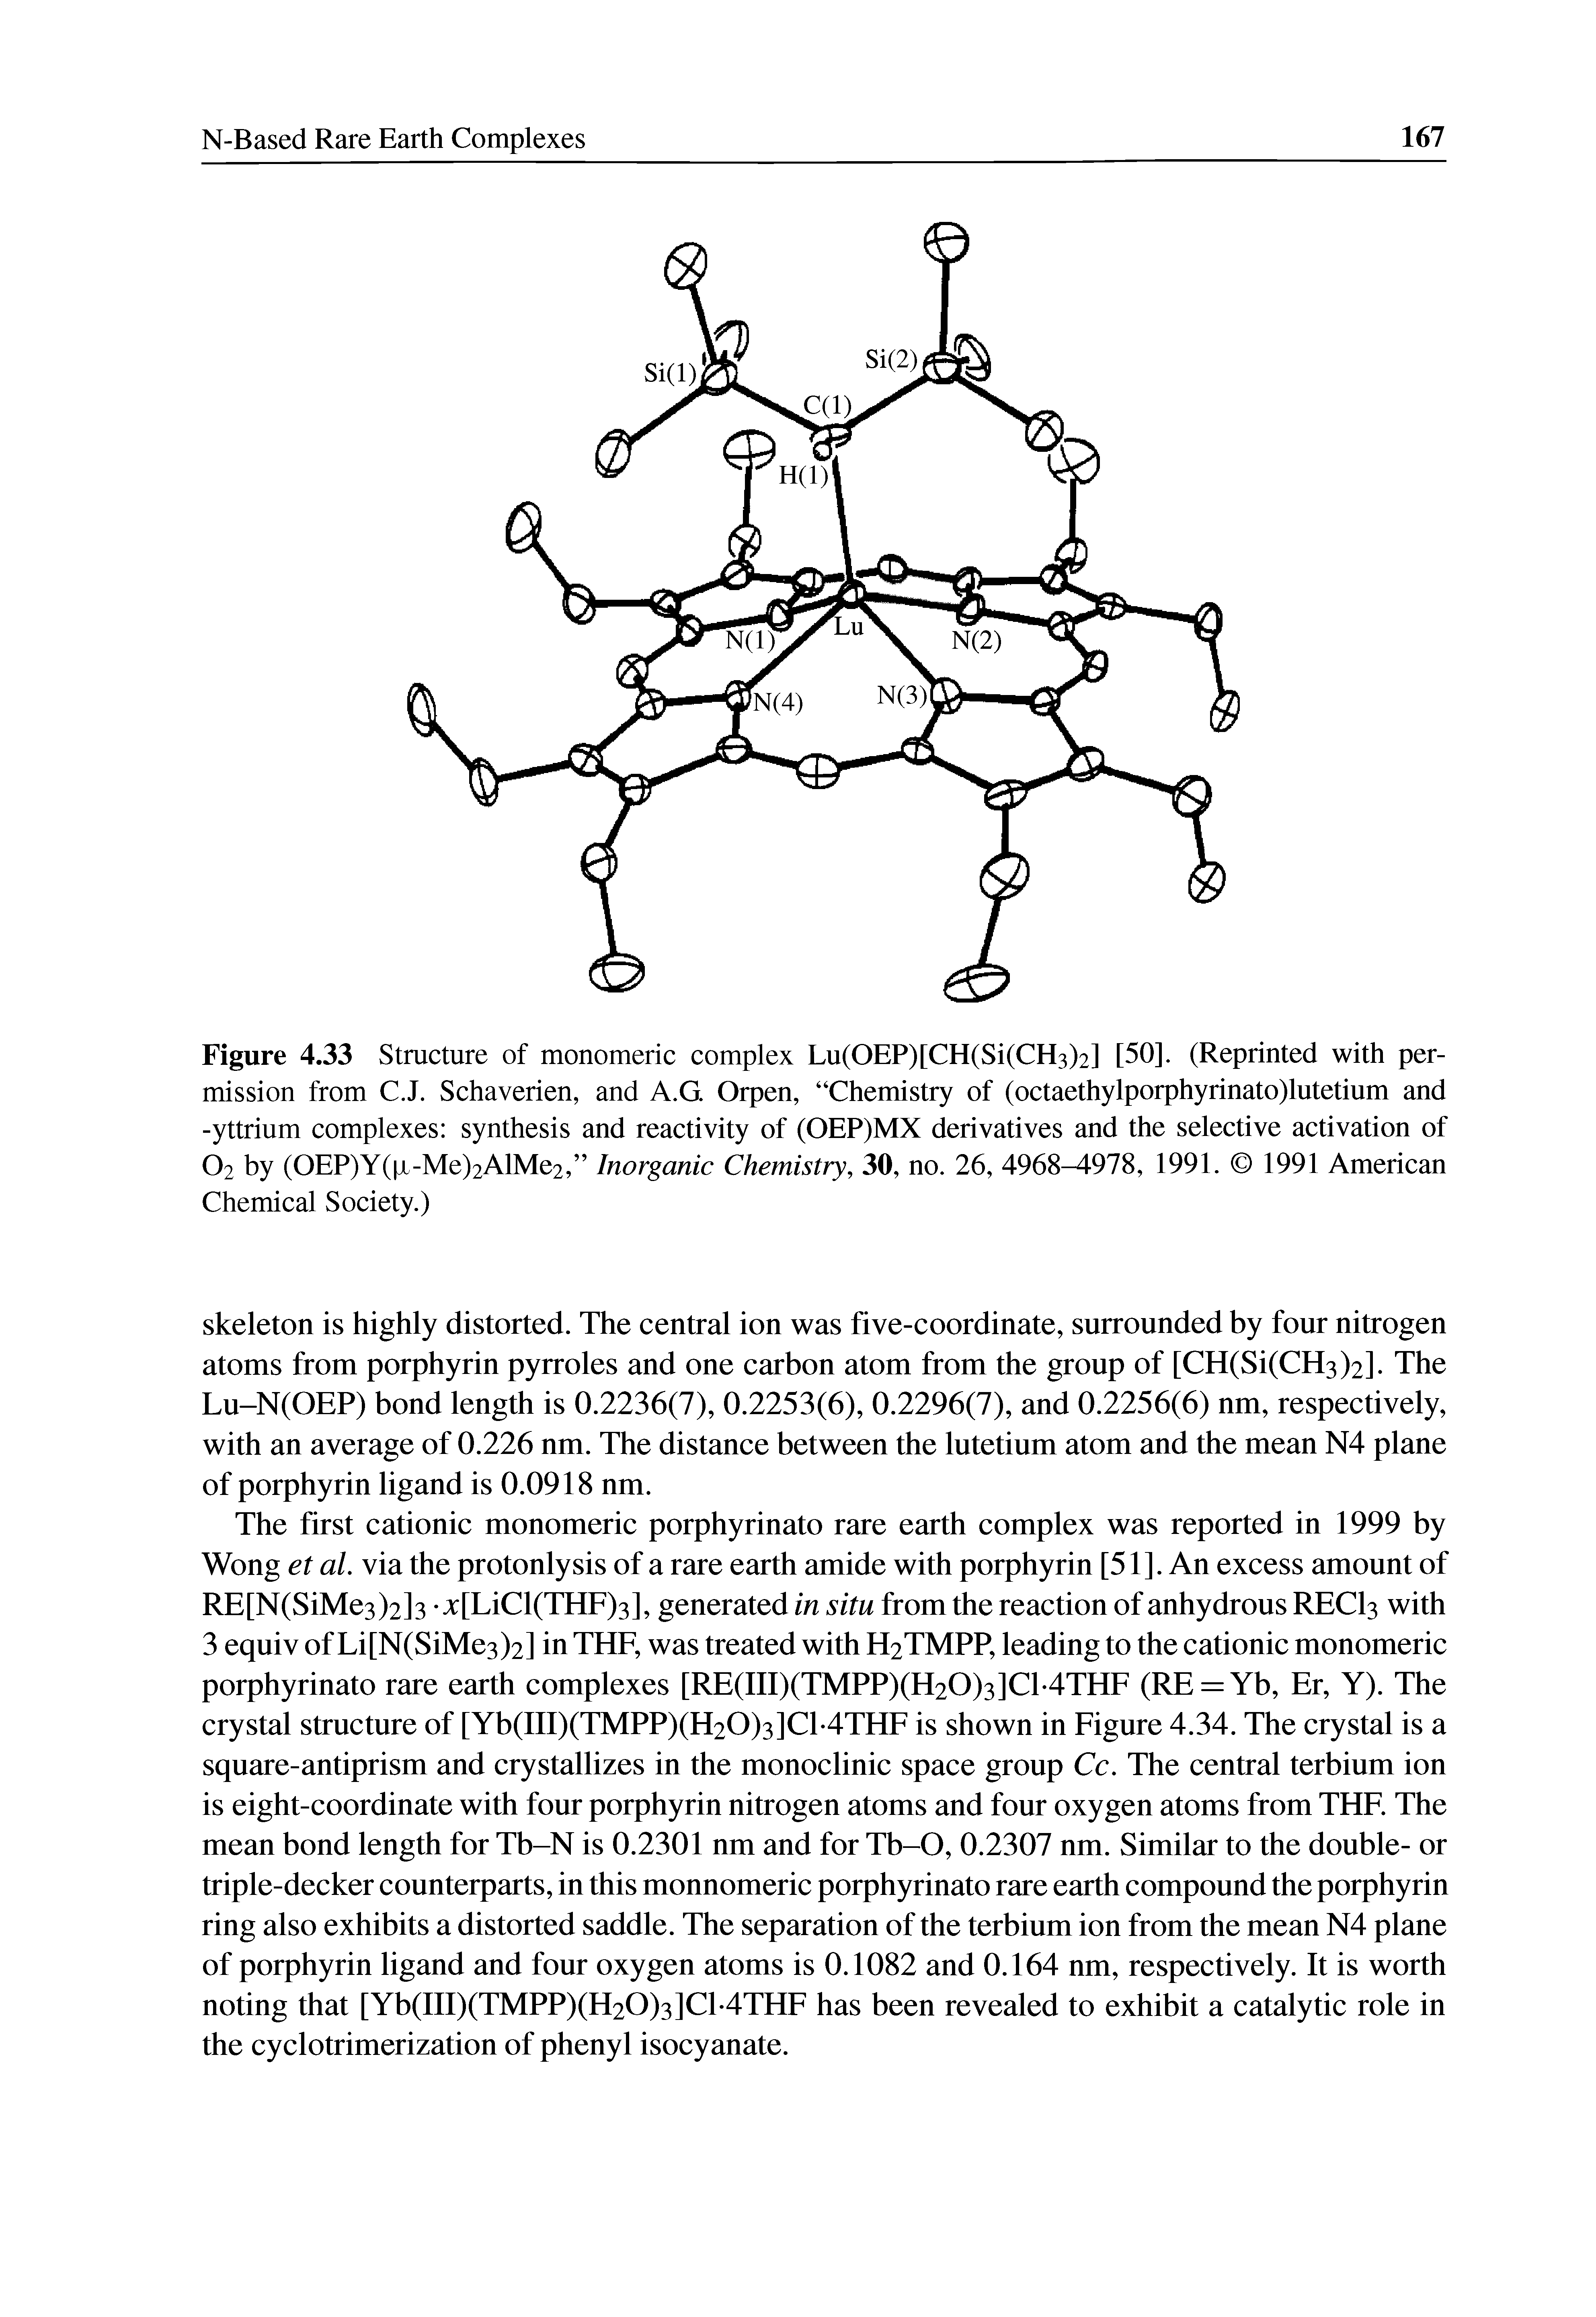 Figure 4.33 Structure of monomeric complex Lu(OEP)[CH(Si(CH3)2] [50]. (Reprinted with permission from C.J. Schaverien, and A.G Orpen, Chemistry of (octaethylporphyrinato)lutetium and -yttrium complexes synthesis and reactivity of (OEP)MX derivatives and the selective activation of O2 by (OEP)Y( jL-Me)2AlMe2, Inorganic Chemistry, 30, no. 26, 4968-4978, 1991. 1991 American Chemical Society.)...